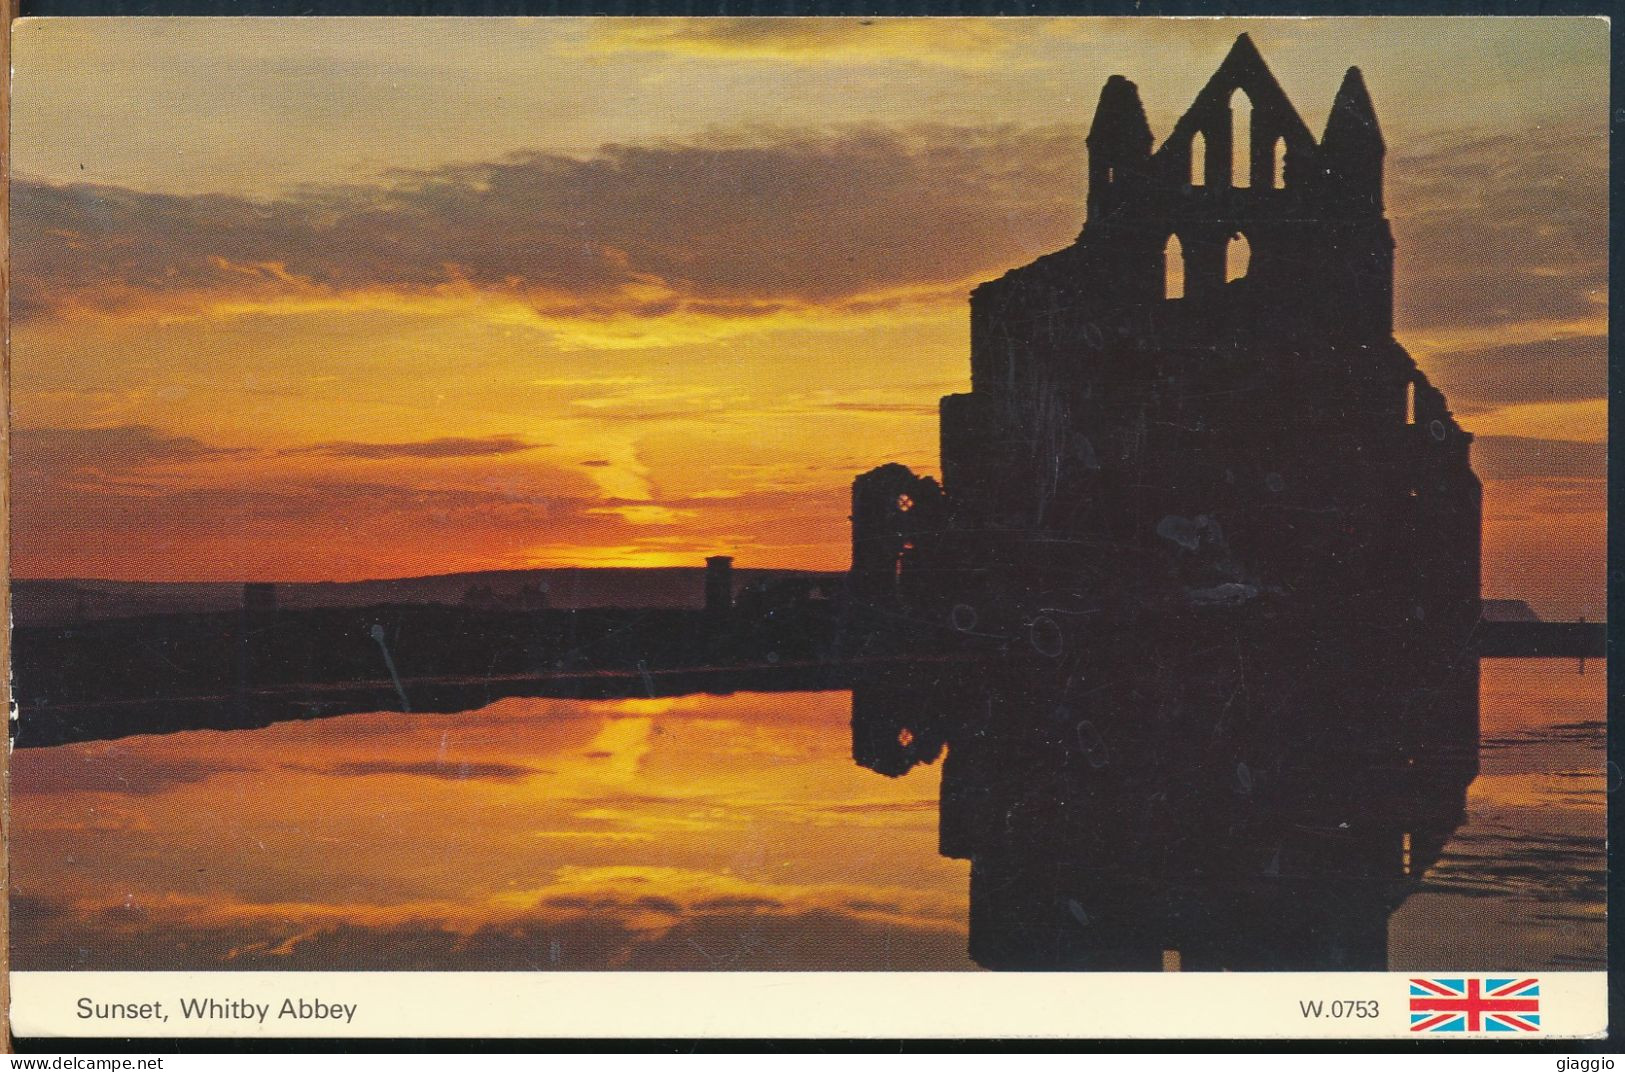 °°° 22072 - UK - WHITBY ABBEY - SUNSET - 1987 With Stamps °°° - Whitby